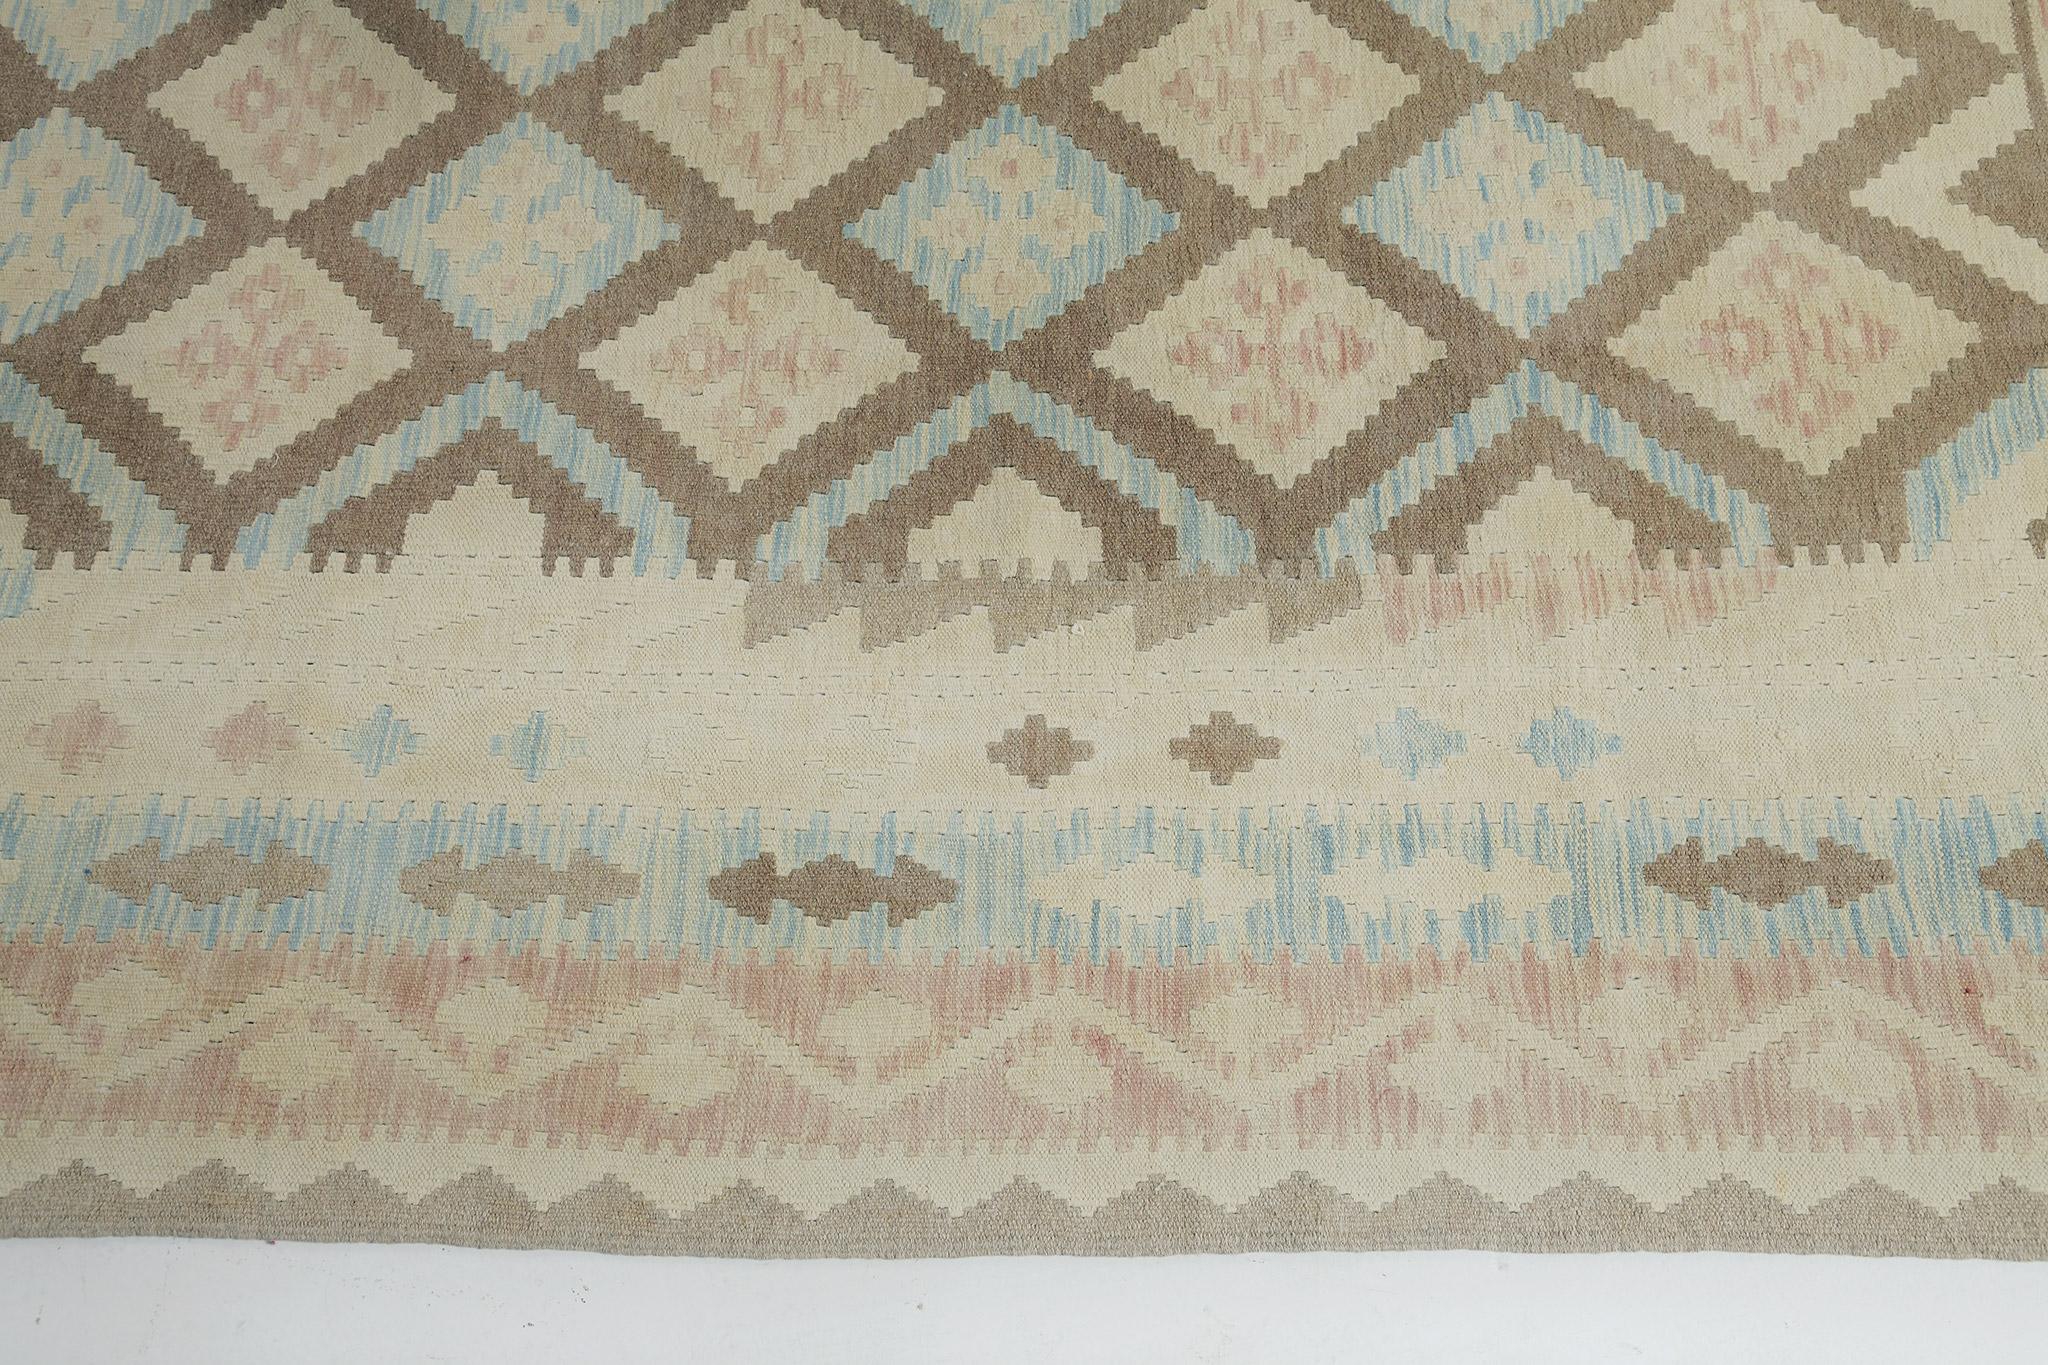 A stunning vintage-style Tribal flat weave banded with various geometric symbols and elements. Satisfactorily complemented with muted earth-hued diamond patterns that create a simple yet fascinating design for a vast variety of interiors. Its